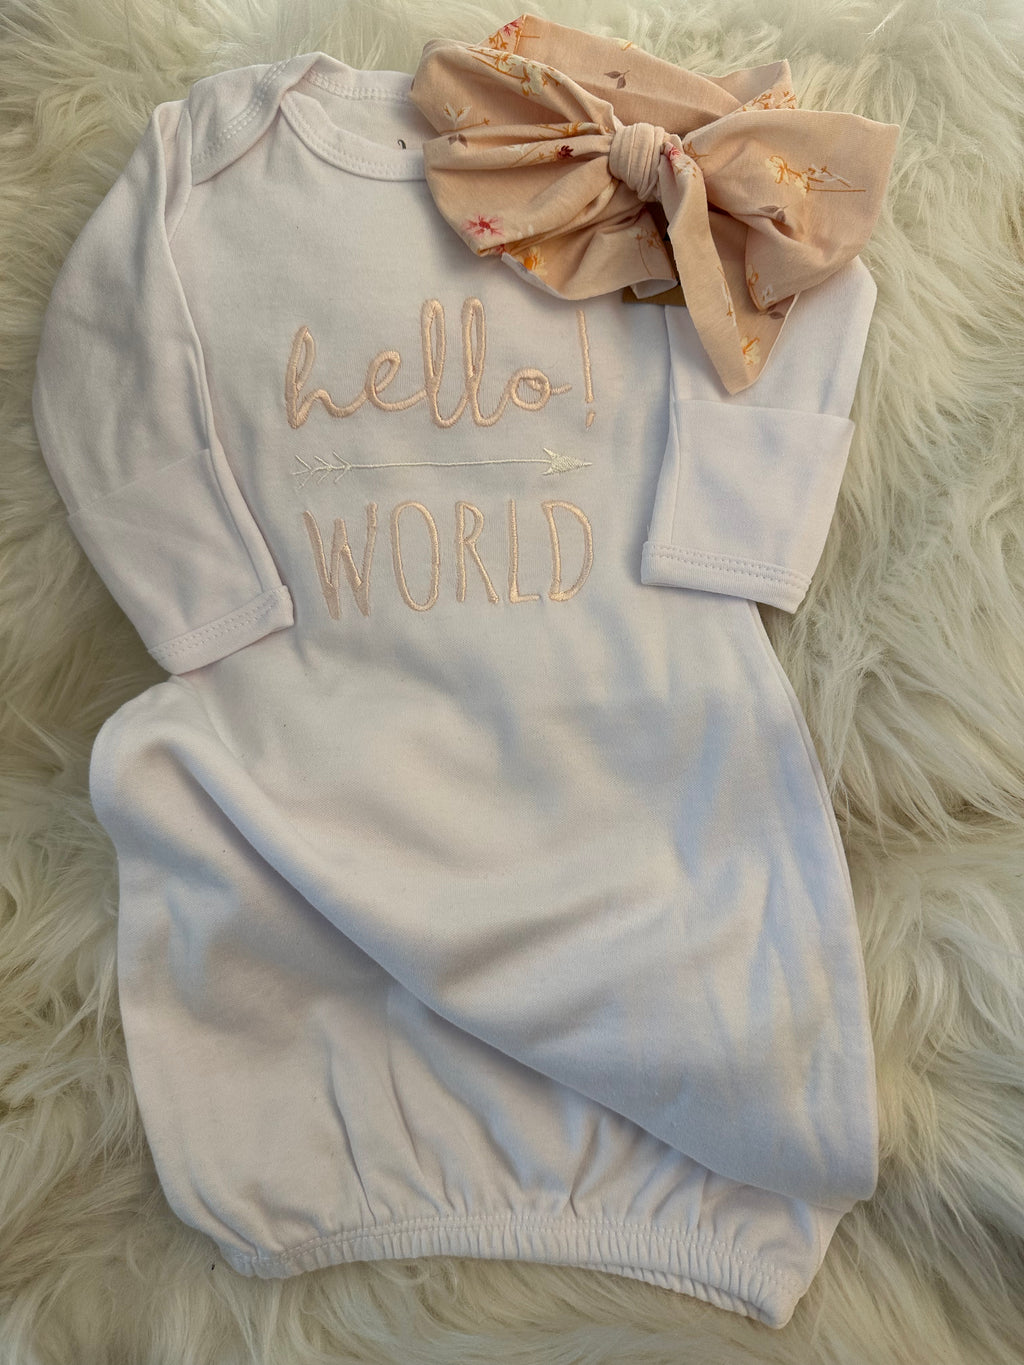 Hello World Baby Gown Bow Set